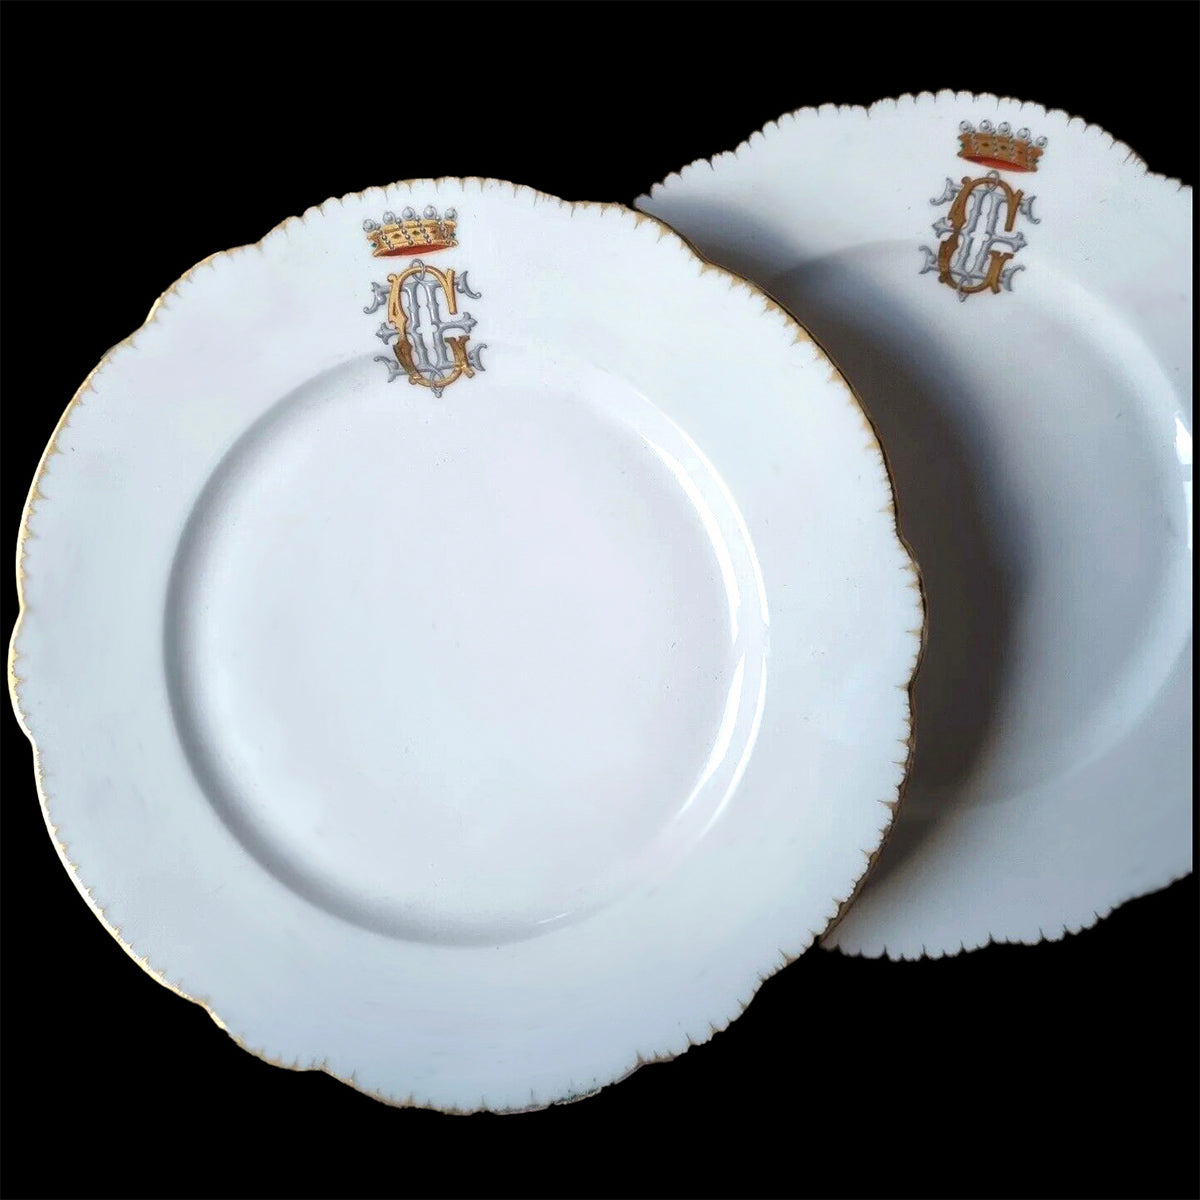 PAIR of Antique French Porcelain Hand Painted Dessert or Salad Plates, Jeweled Crown Monogram